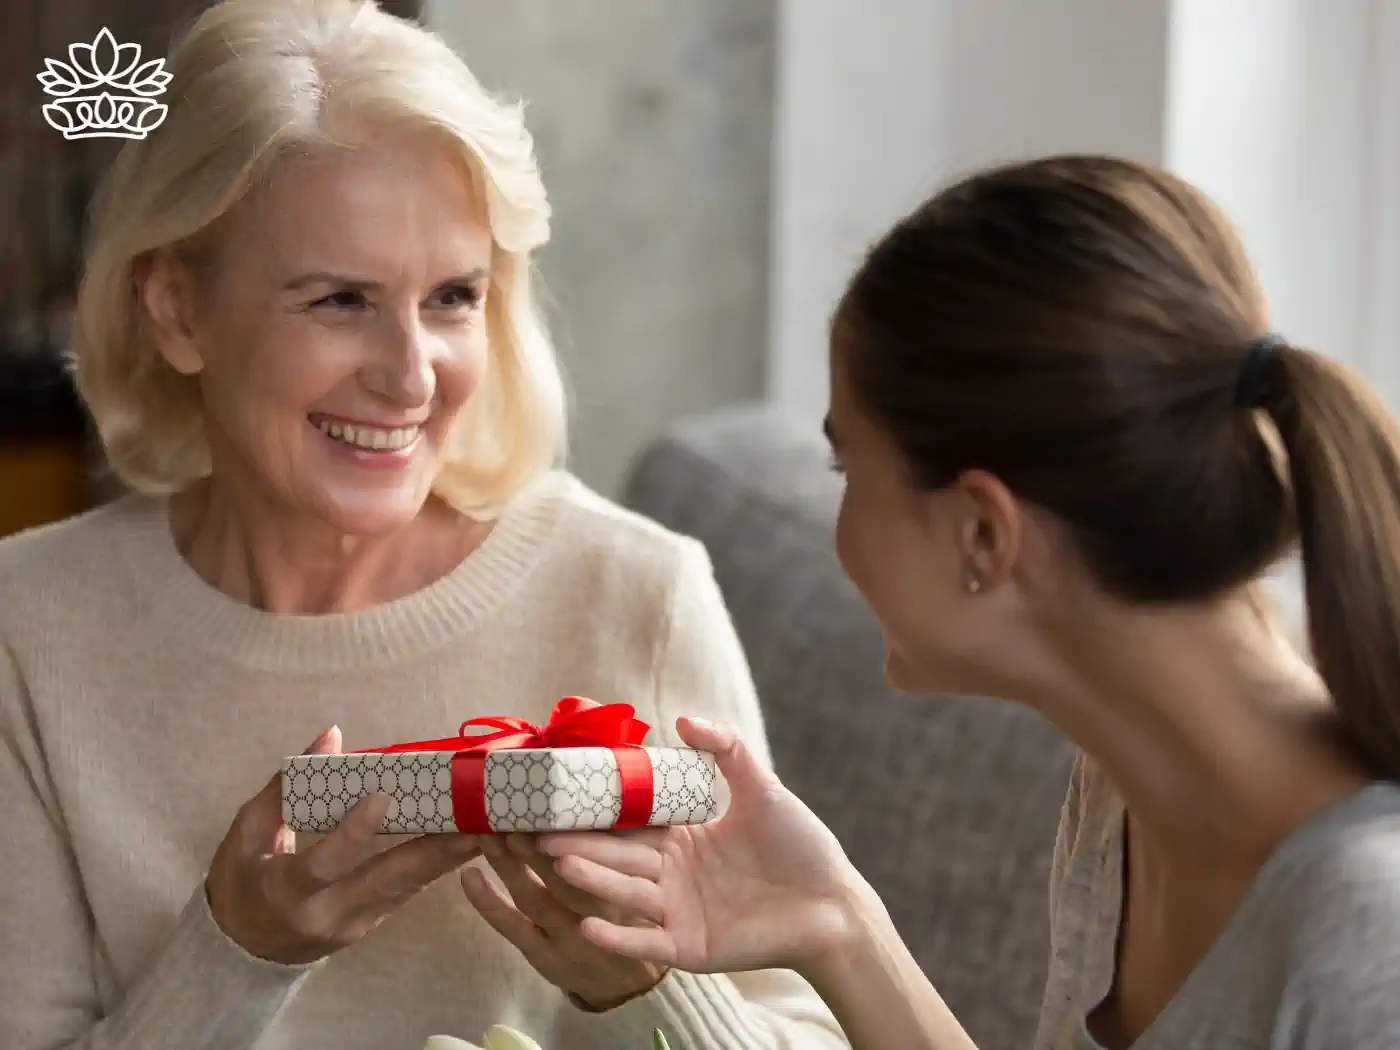 Young woman giving her elderly mother a beautifully wrapped gift box, both smiling warmly in a cozy indoor setting. 